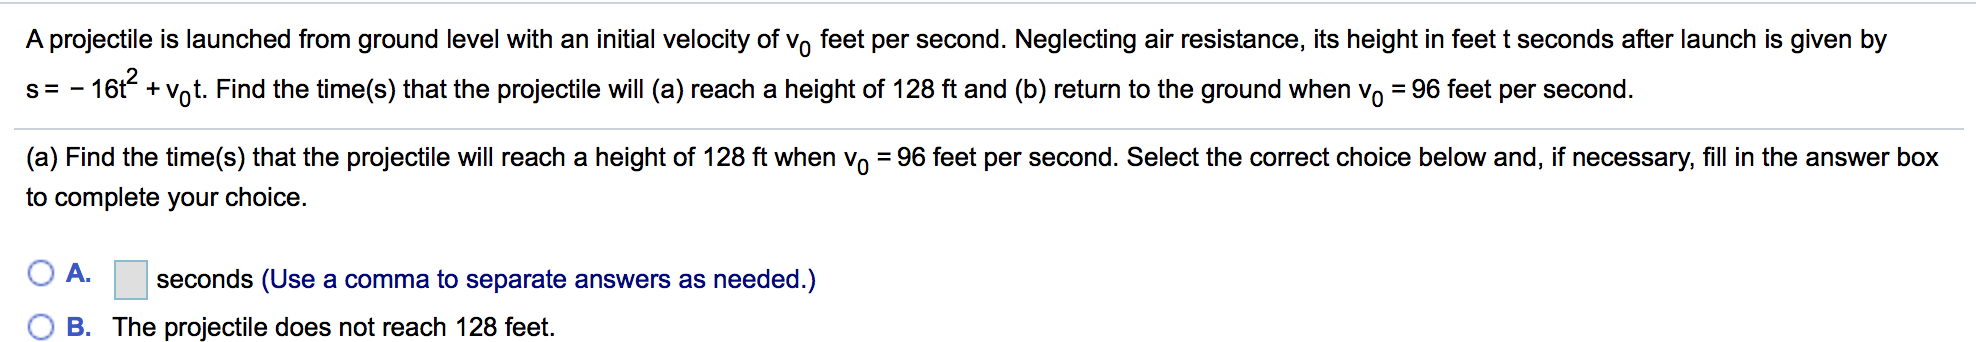 A projectile is launched from ground level with an initial velocity of vo feet per second. Neglecting air resistance, its height in feet t seconds after launch is given by
s-16t+Vot. Find the time(s) that the projectile will (a) reach a height of 128 ft and (b) return to the ground when vo - 96 feet per second.
(a) Find the time(s) that the projectile will reach a height of 128 ft when v0-96 feet per second. Select the correct choice below and. if necessary, fill in the answer box
2
to complete your choice.
A· seconds (Use a comma to separate answers as needed.)
B. The projectile does not reach 128 feet.
